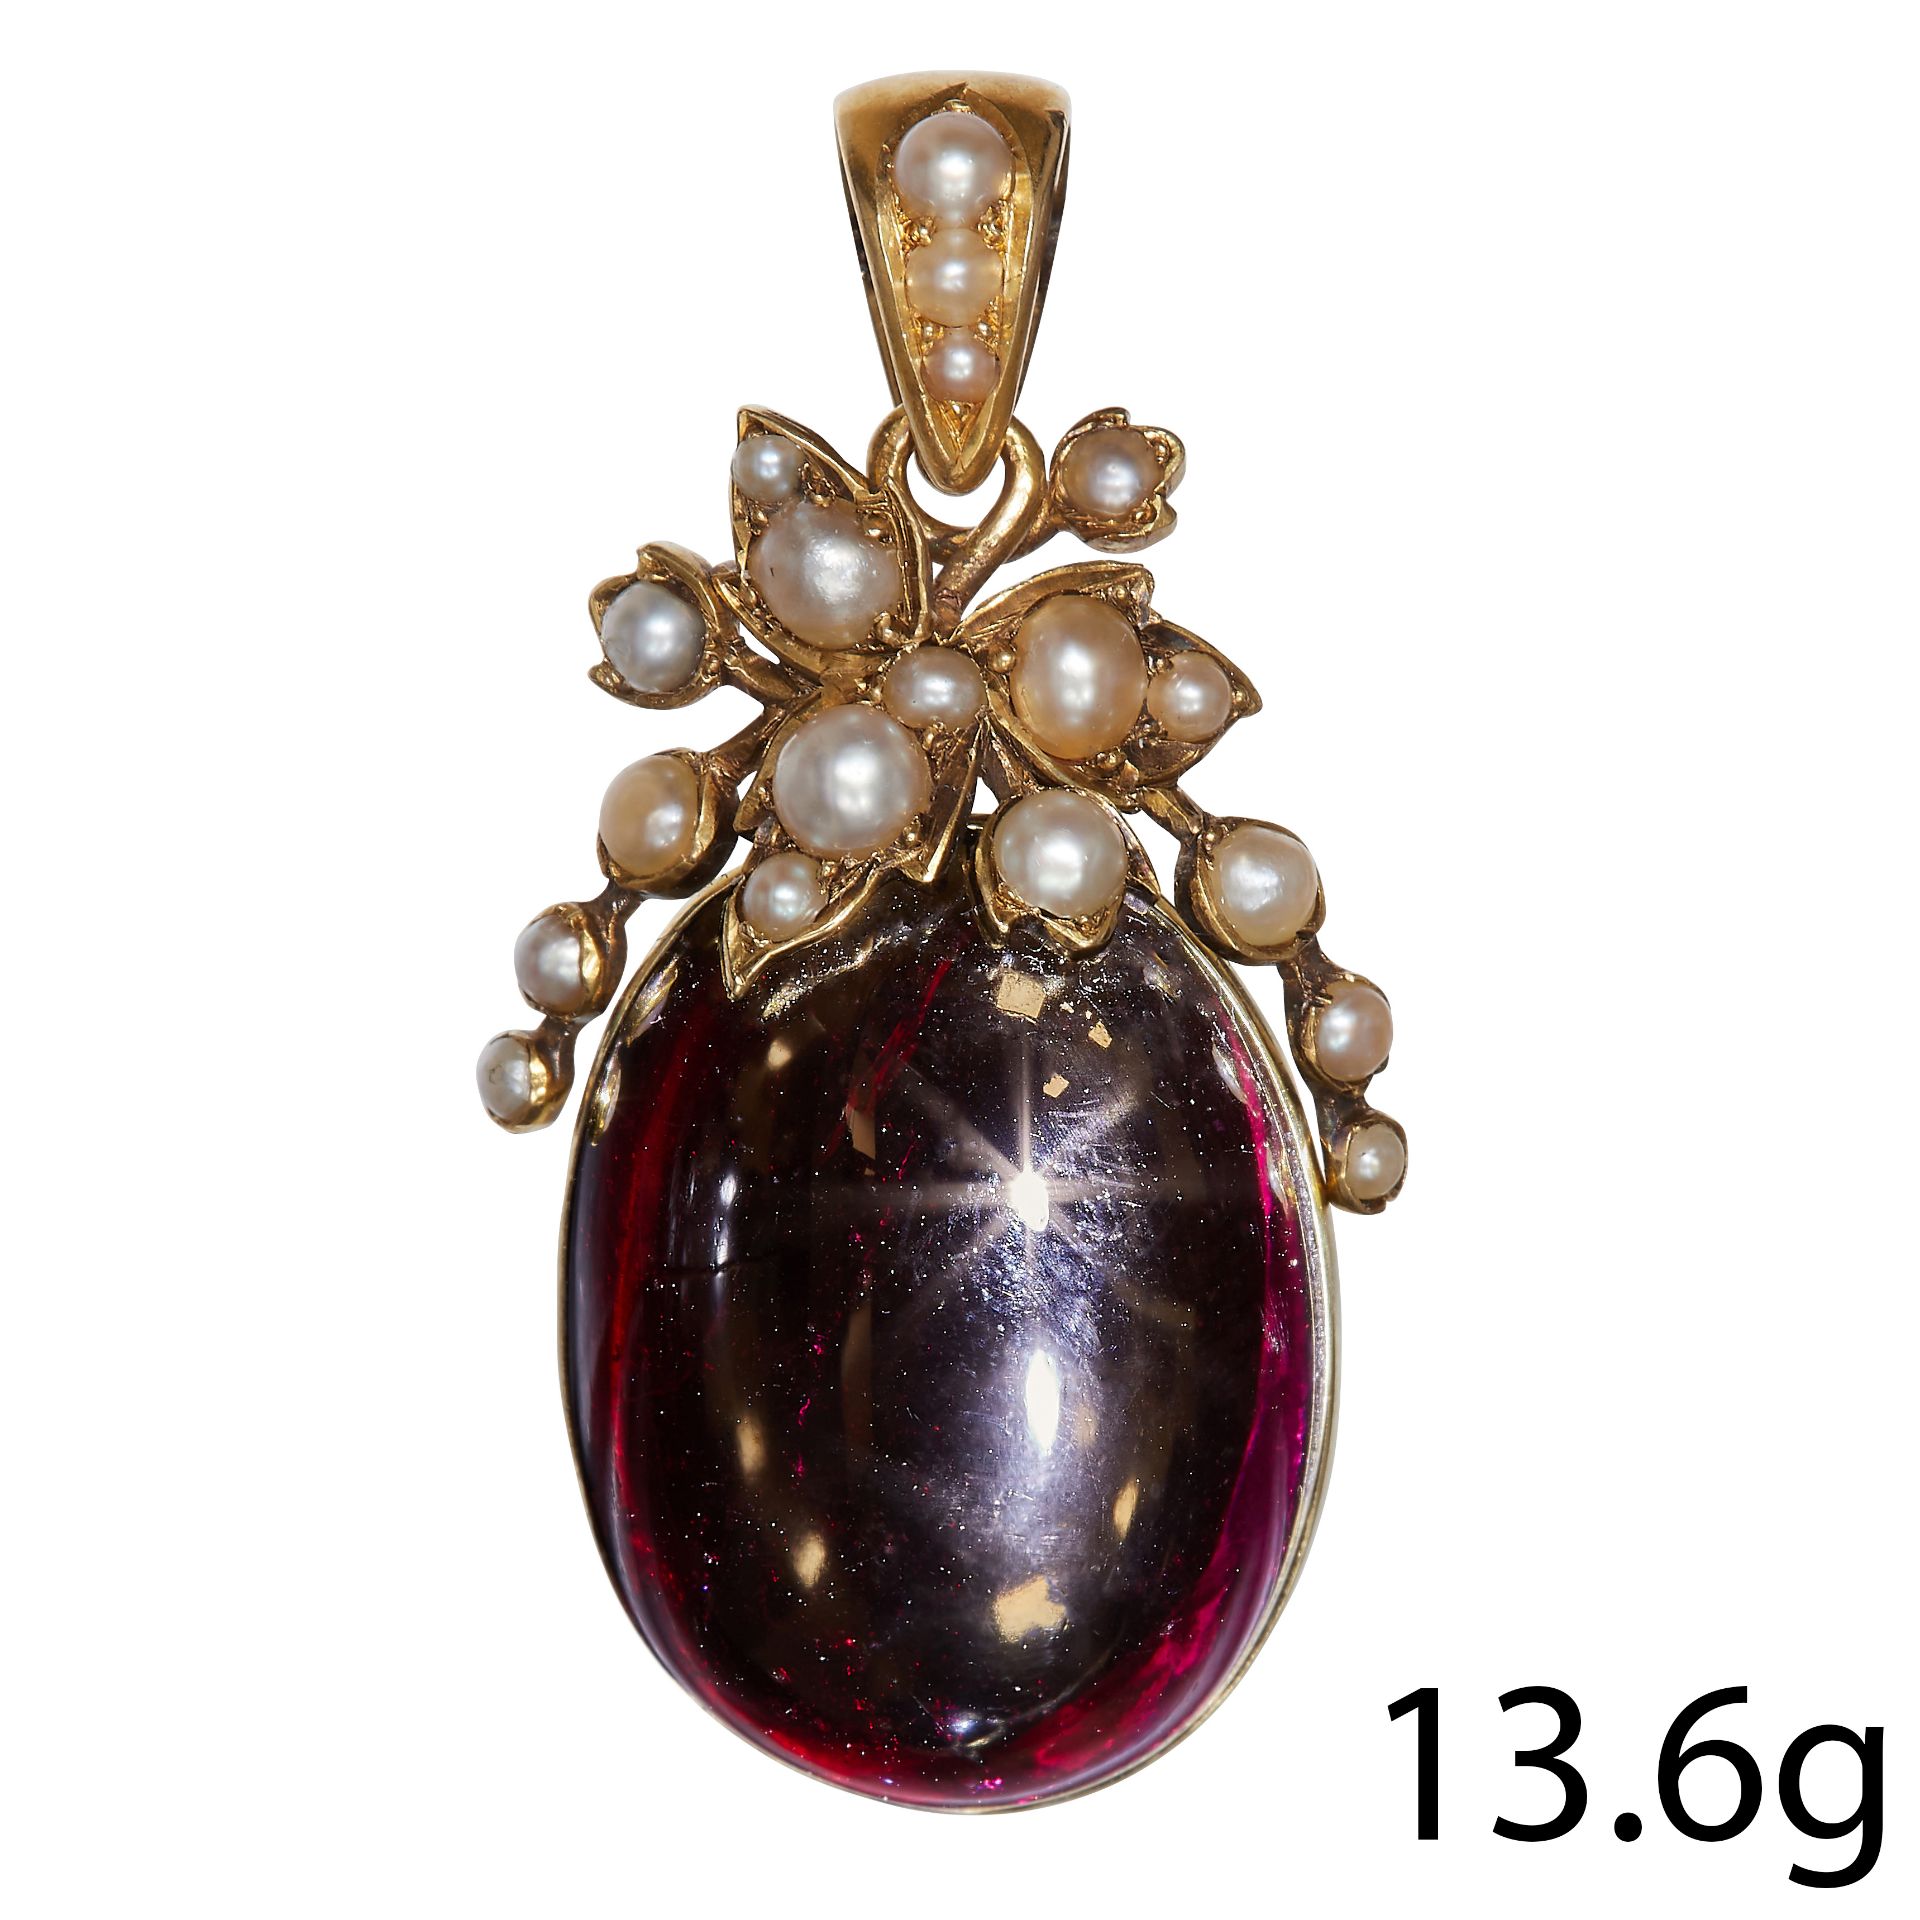 ANTIQUE GOLD GARNET AND PEARL PENDANT